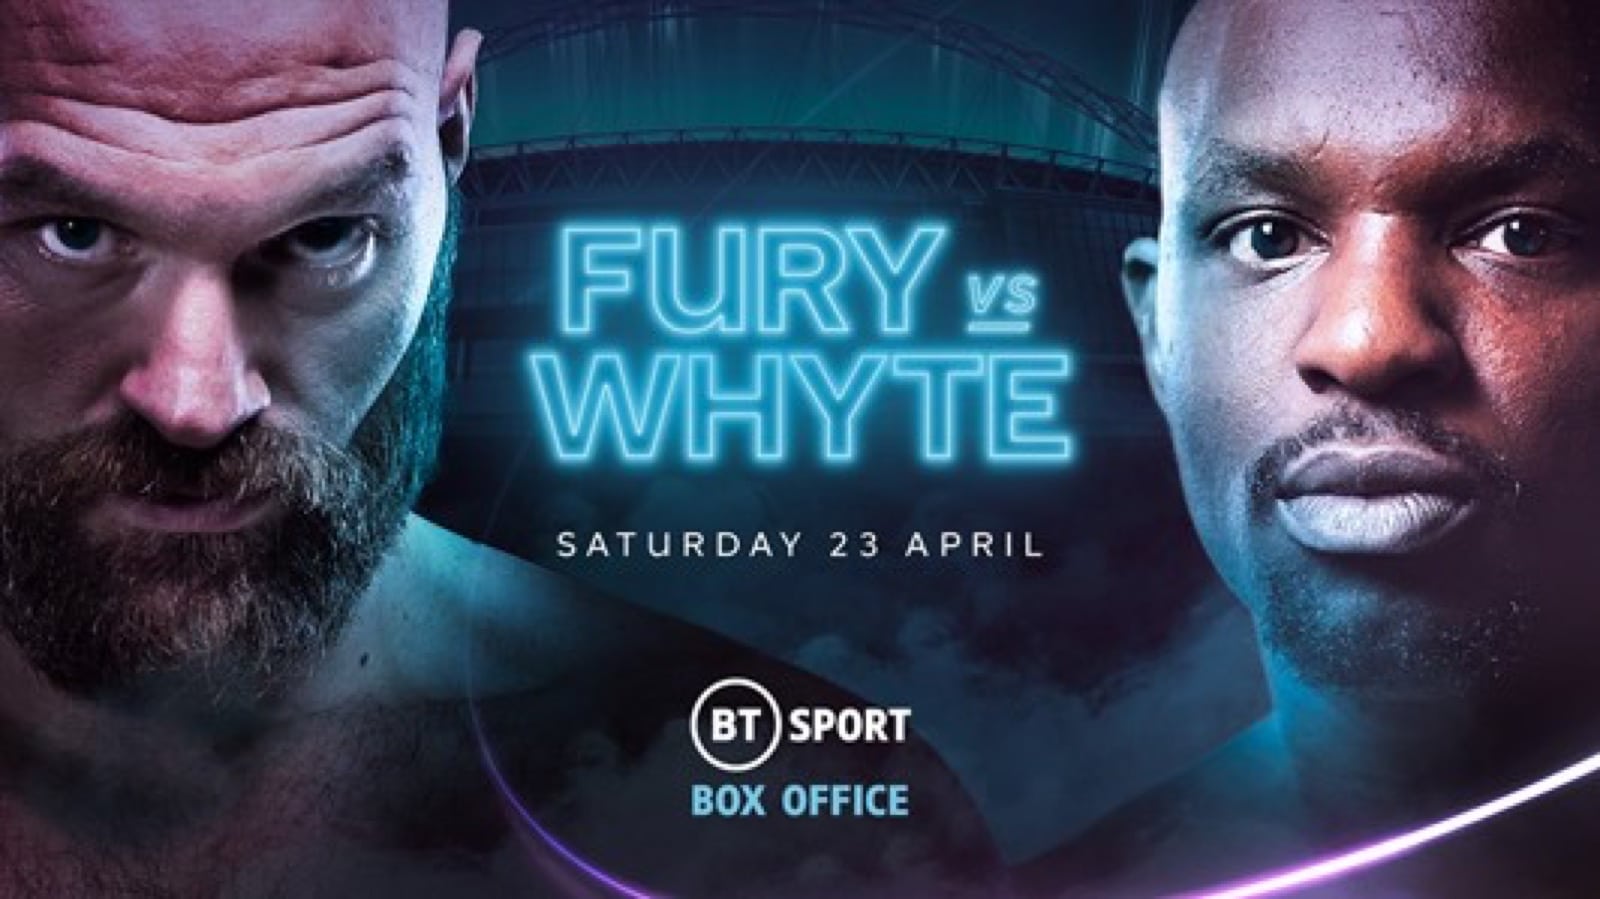 Image: Fury vs. Whyte undercard announced for April 23rd at Wembley Stadium